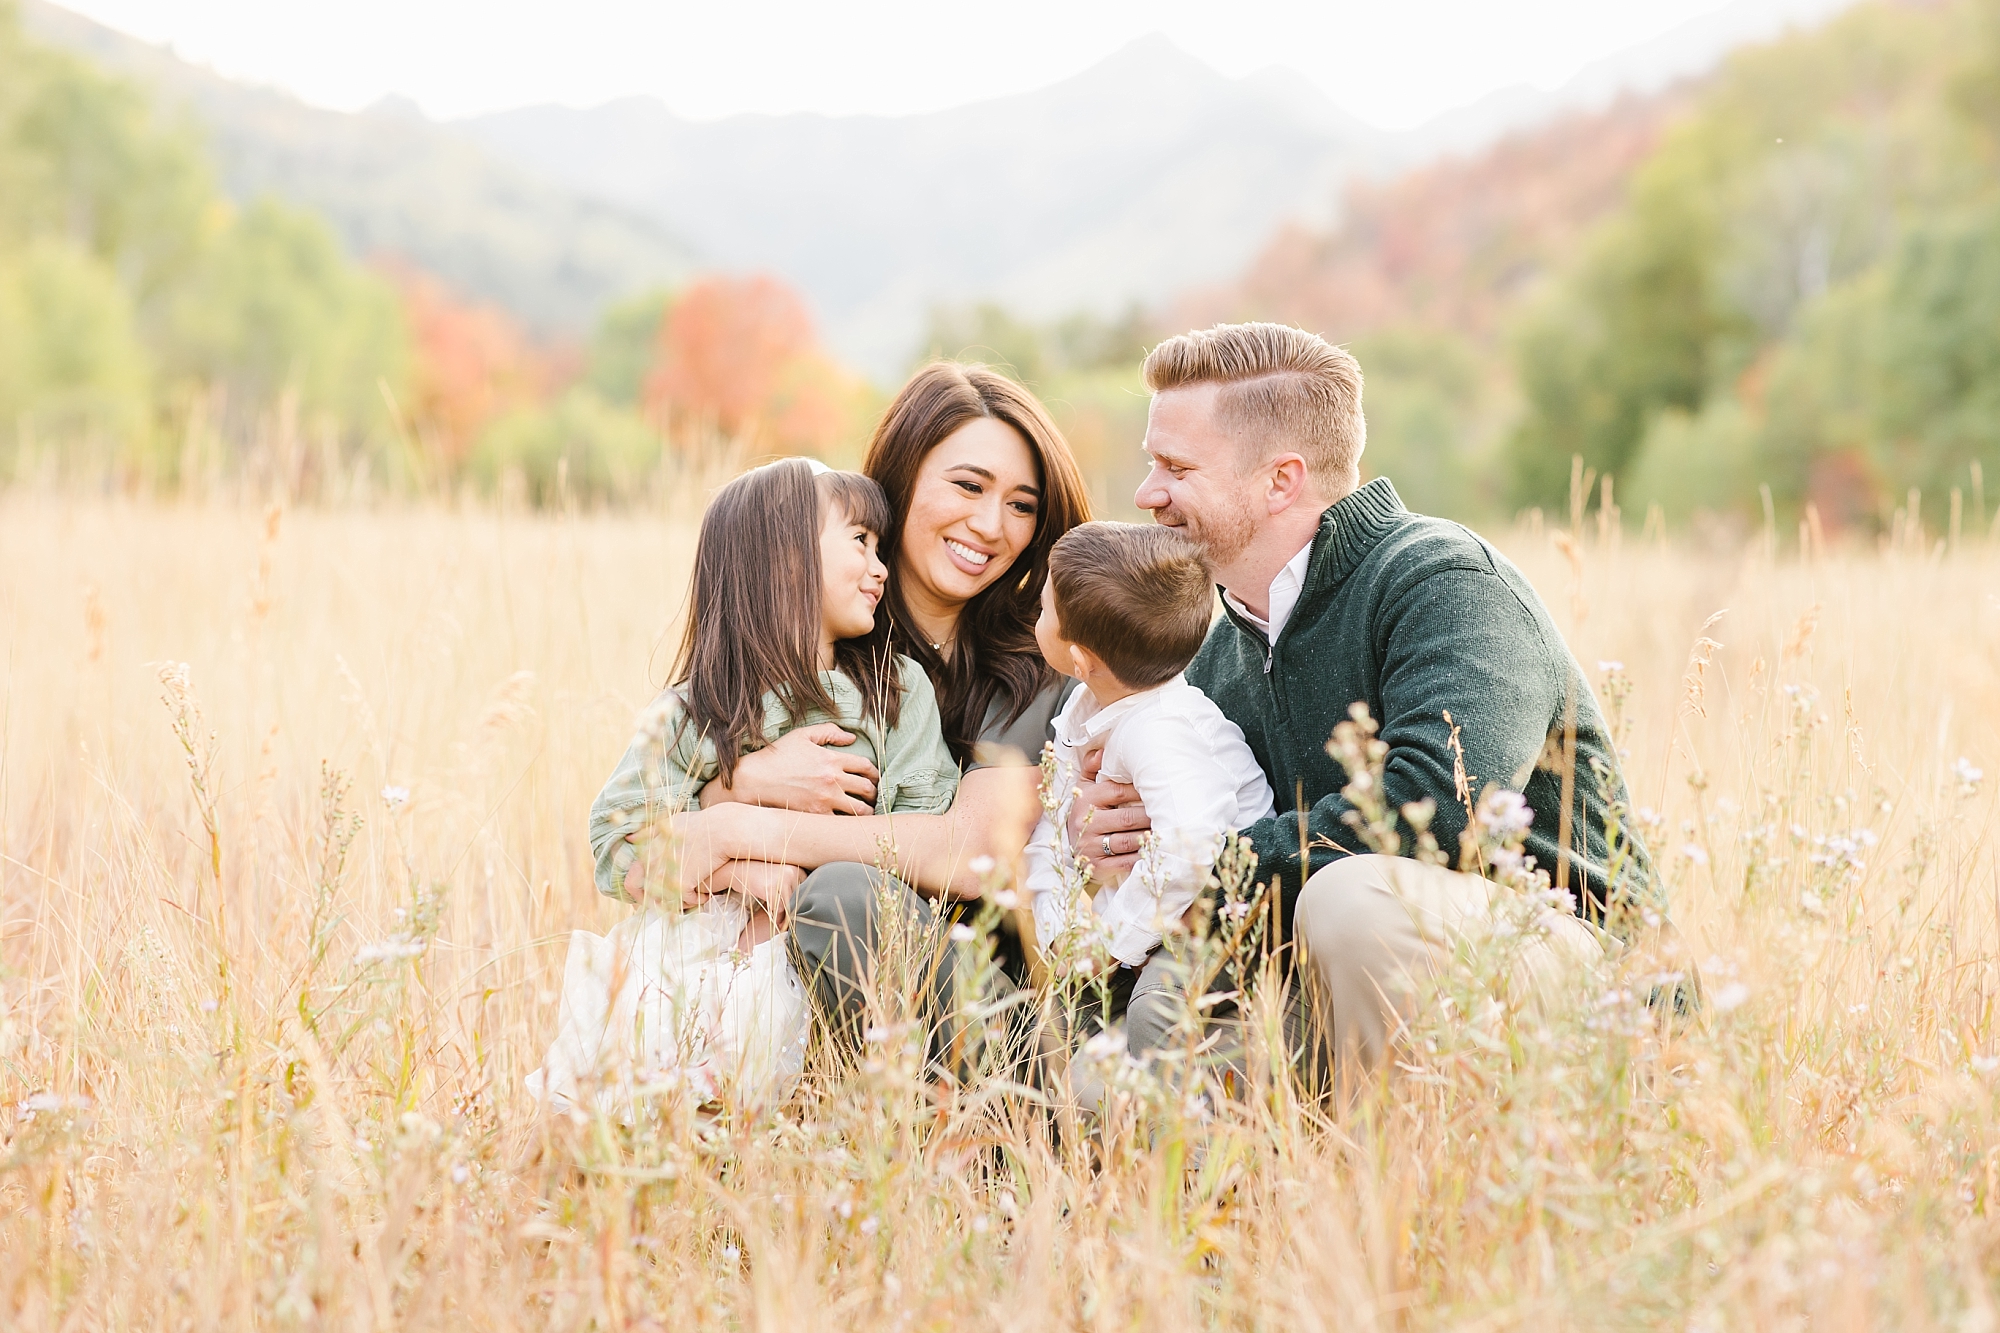 Coordinating the look for your Elegant Utah Fall Family Session